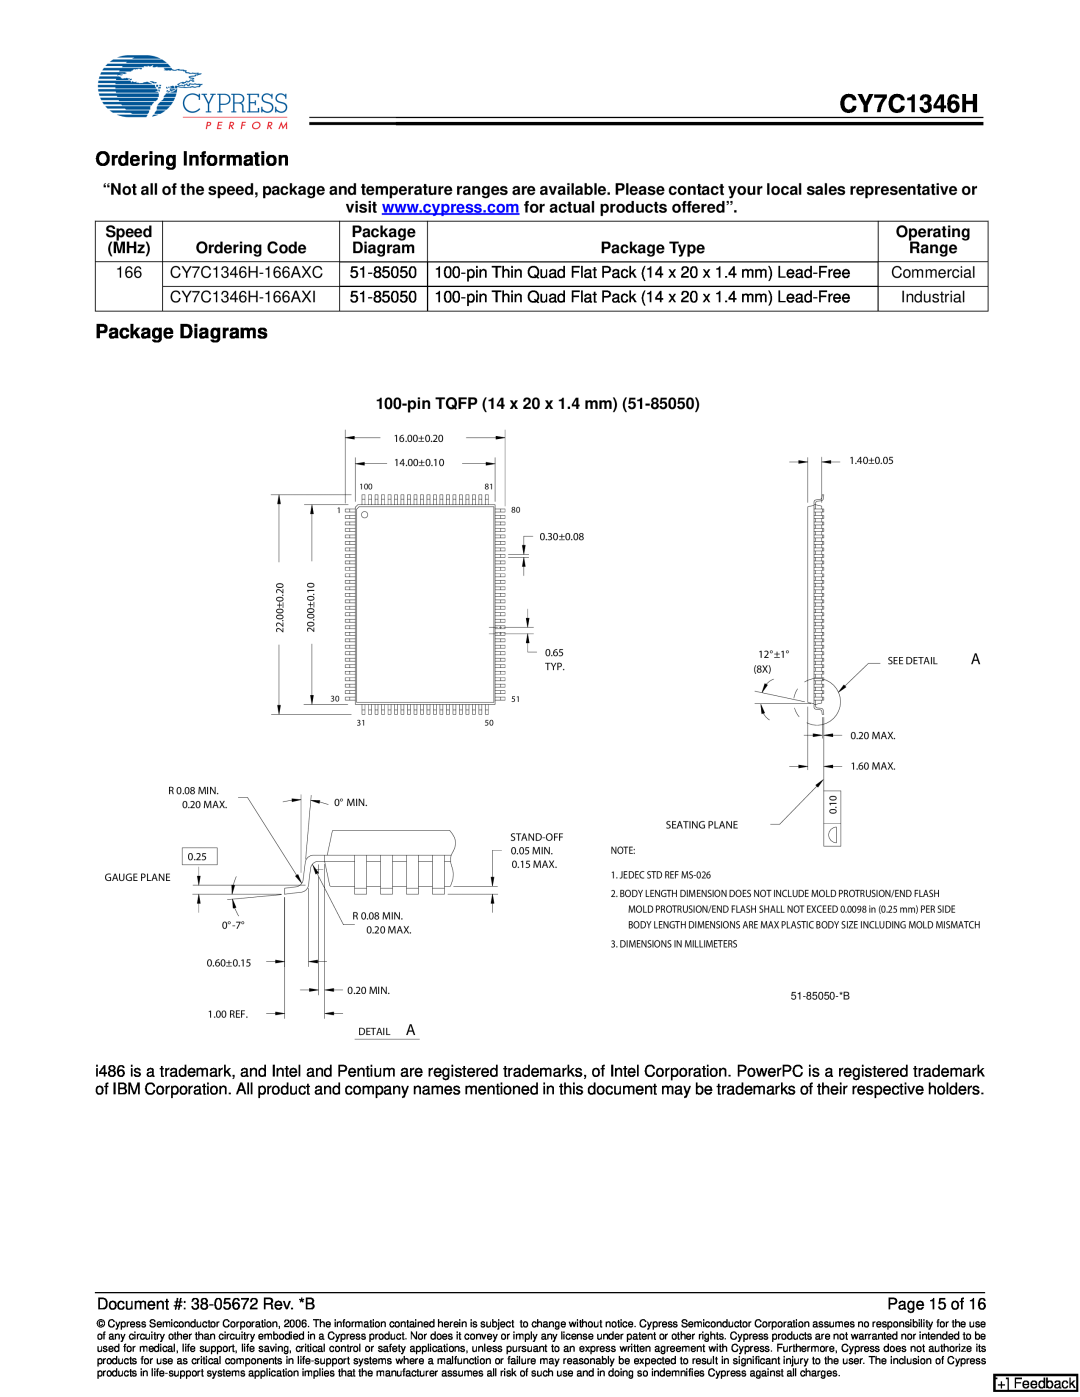 Cypress CY7C1346H manual Ordering Information, Package Diagrams, Commercial, Industrial, Page 15 of 